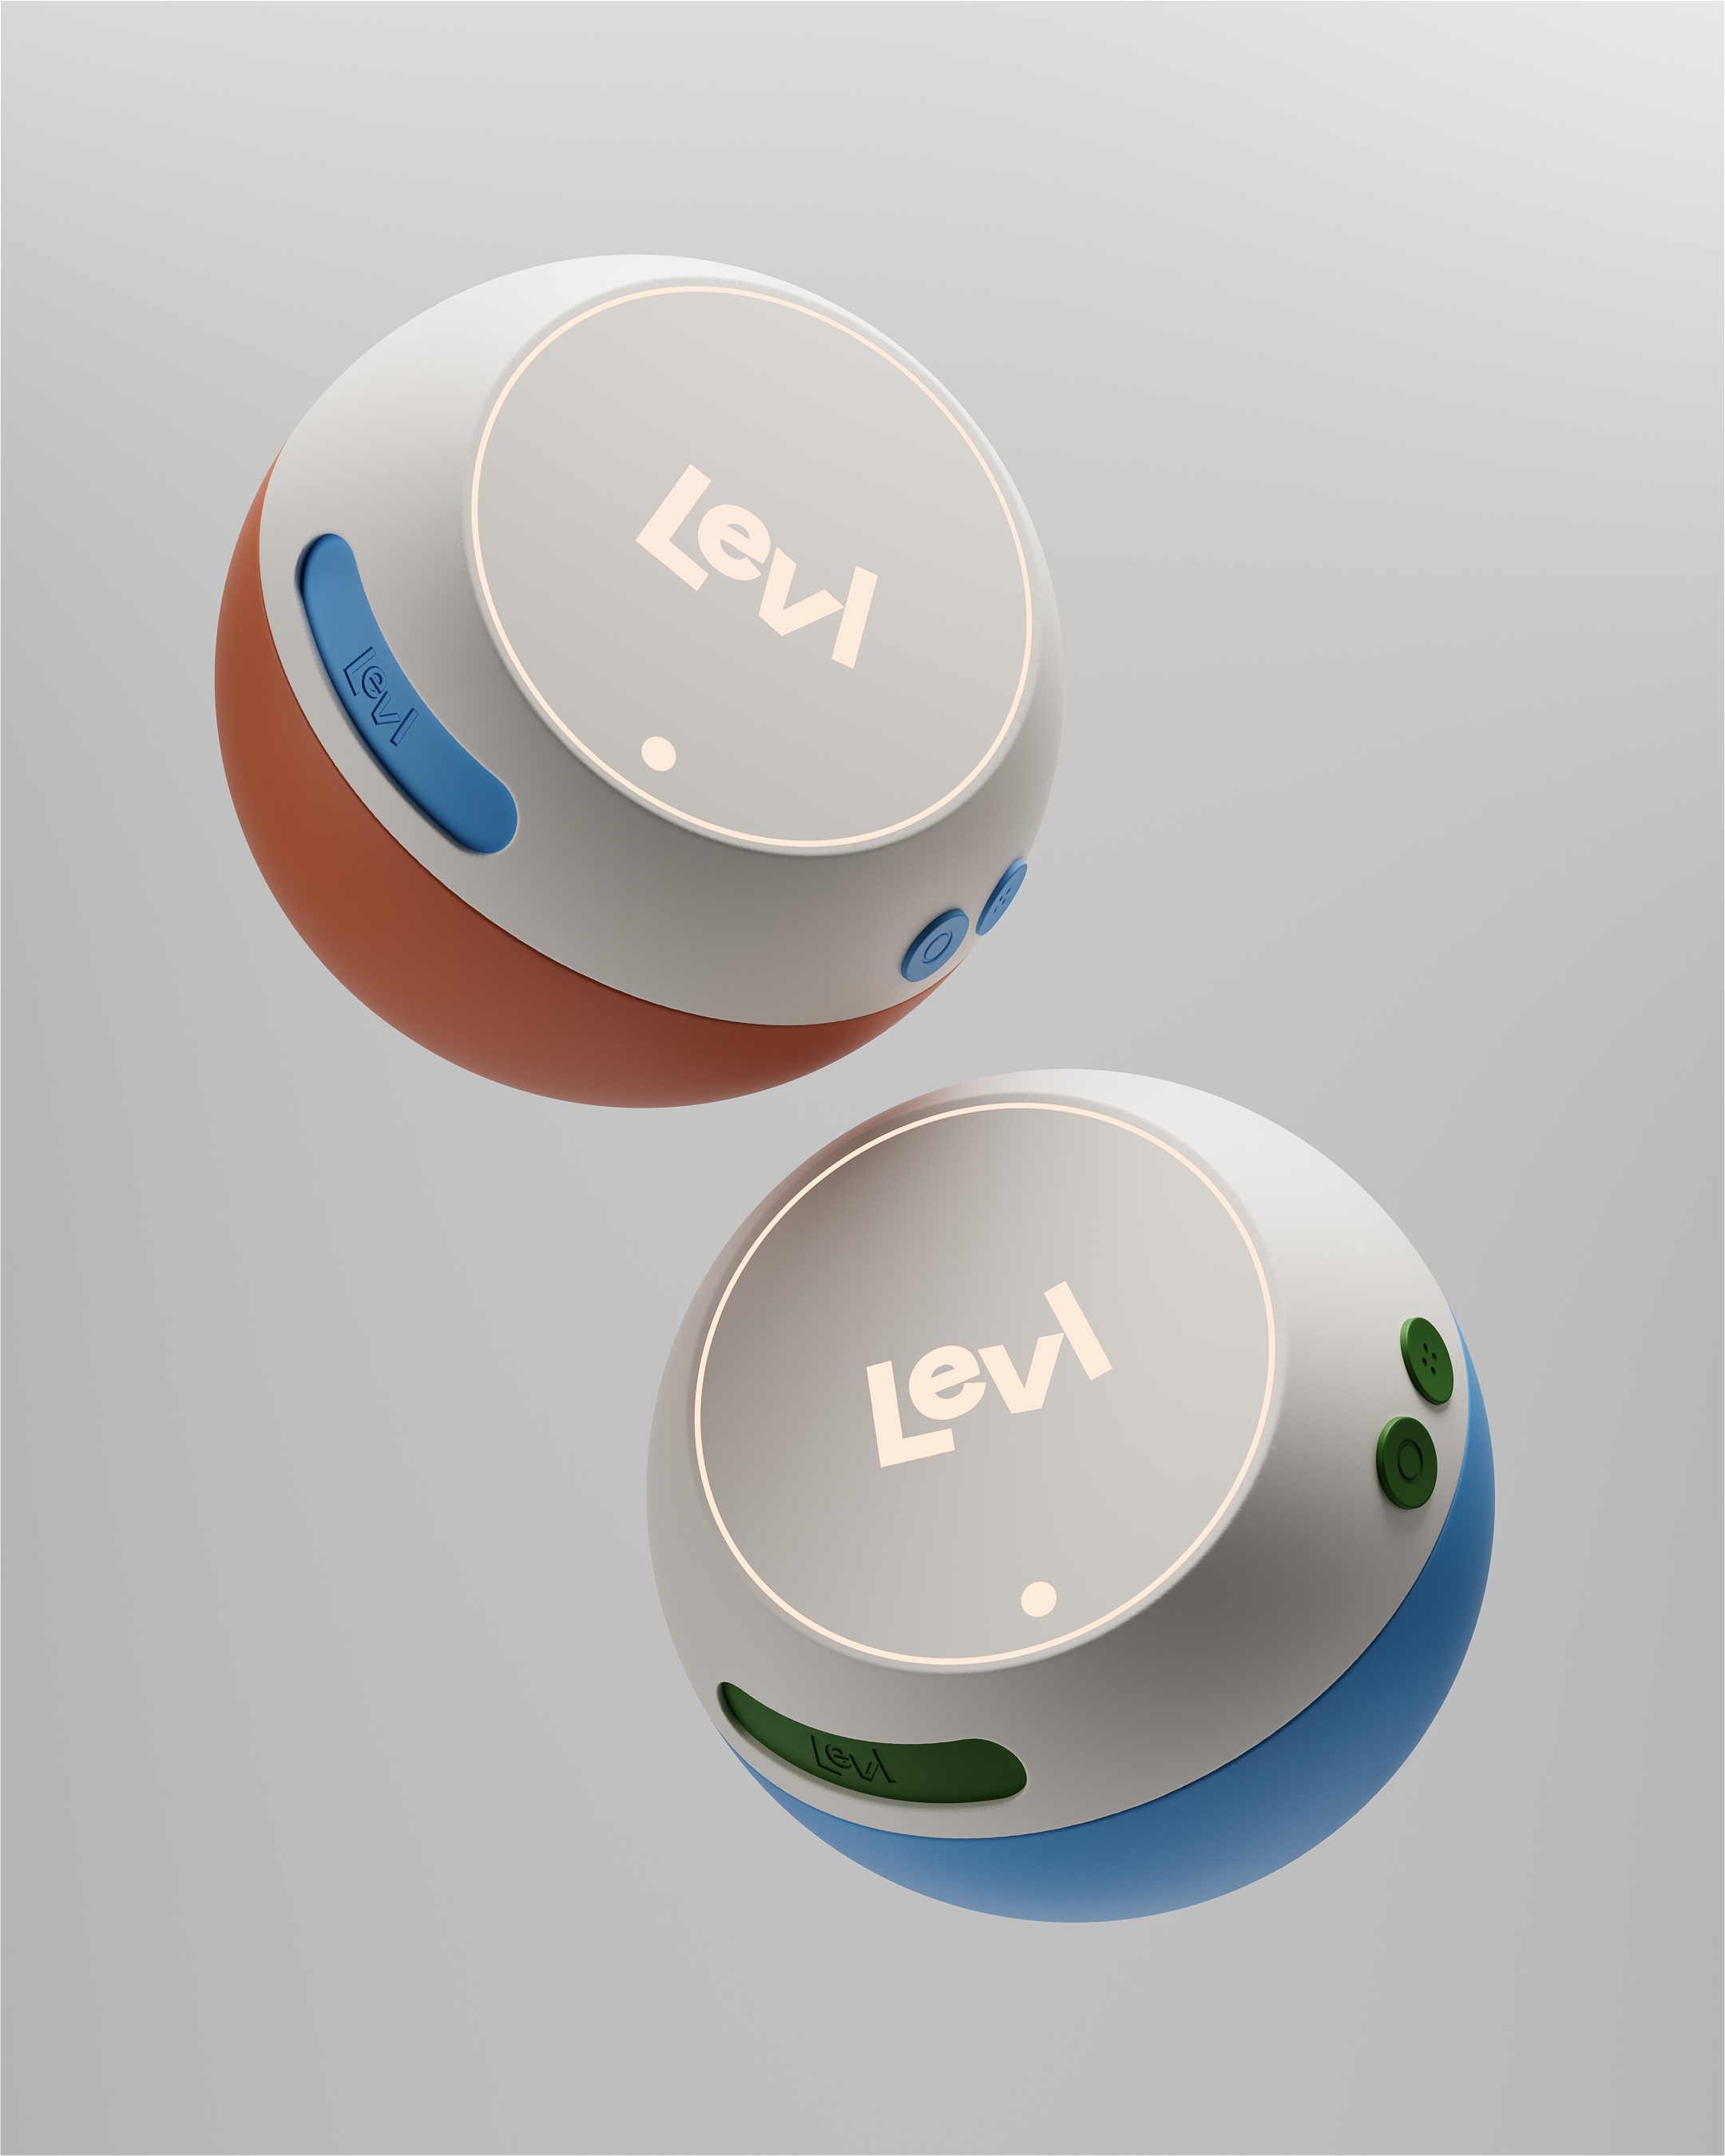 Two levl pill dispensers floating